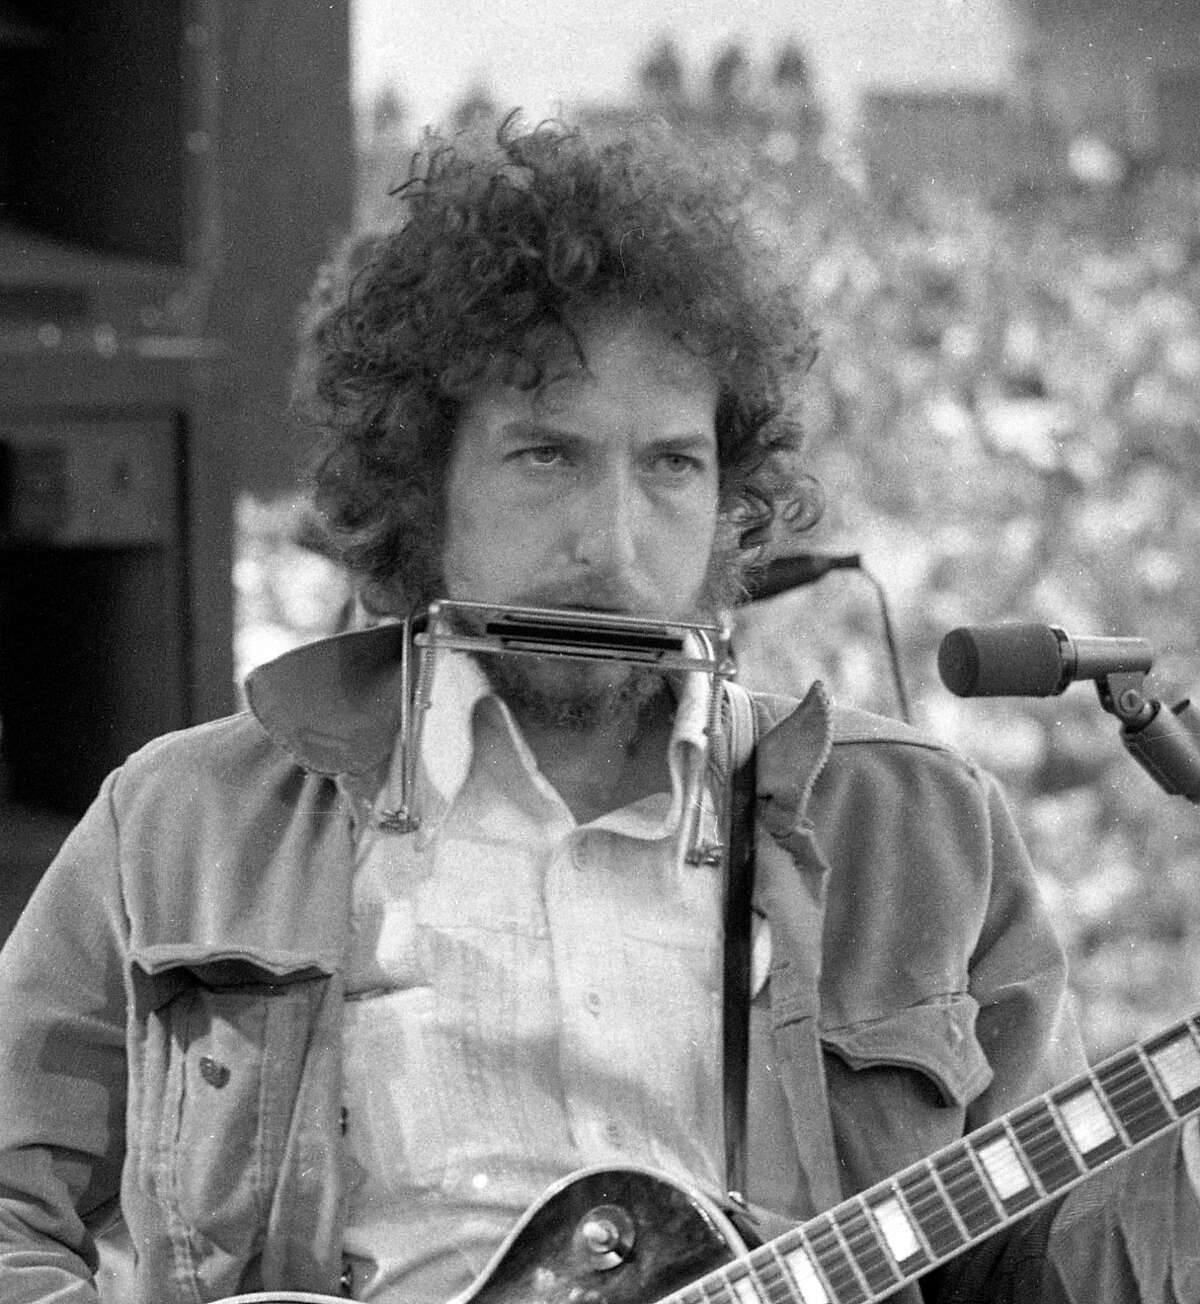 March 23, 1975: Bob Dylan makes a surprise appearance at the SNACK concert, a Kezar Stadium benefit organized by Bill Graham to save San Francisco high school sports. The benefit included performances by Jerry Garcia and Carlos Santana and appearances by Marlon Brando and Willie Mays.